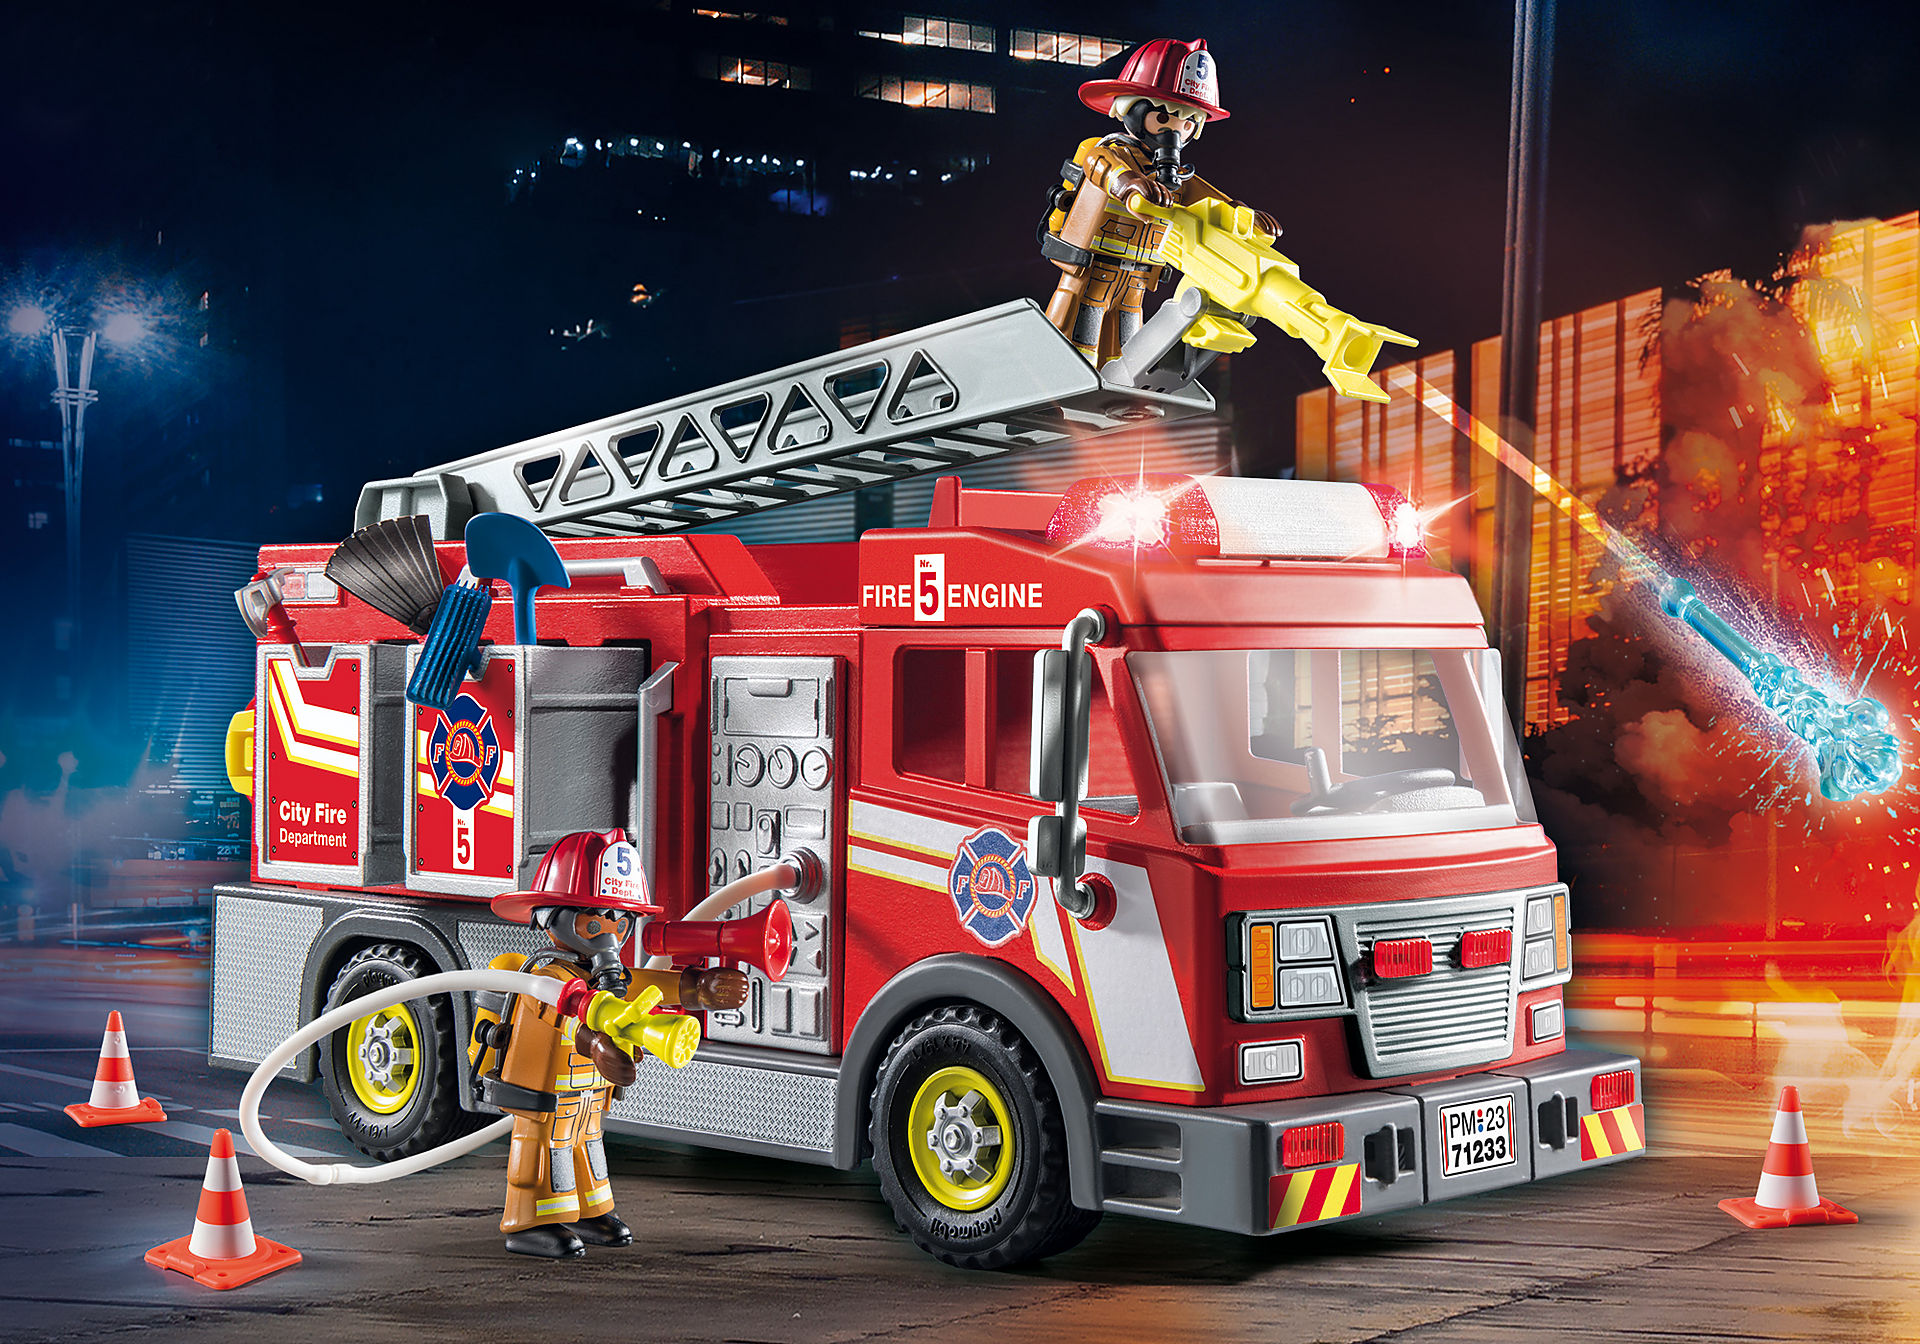 71233 Fire Truck zoom image1